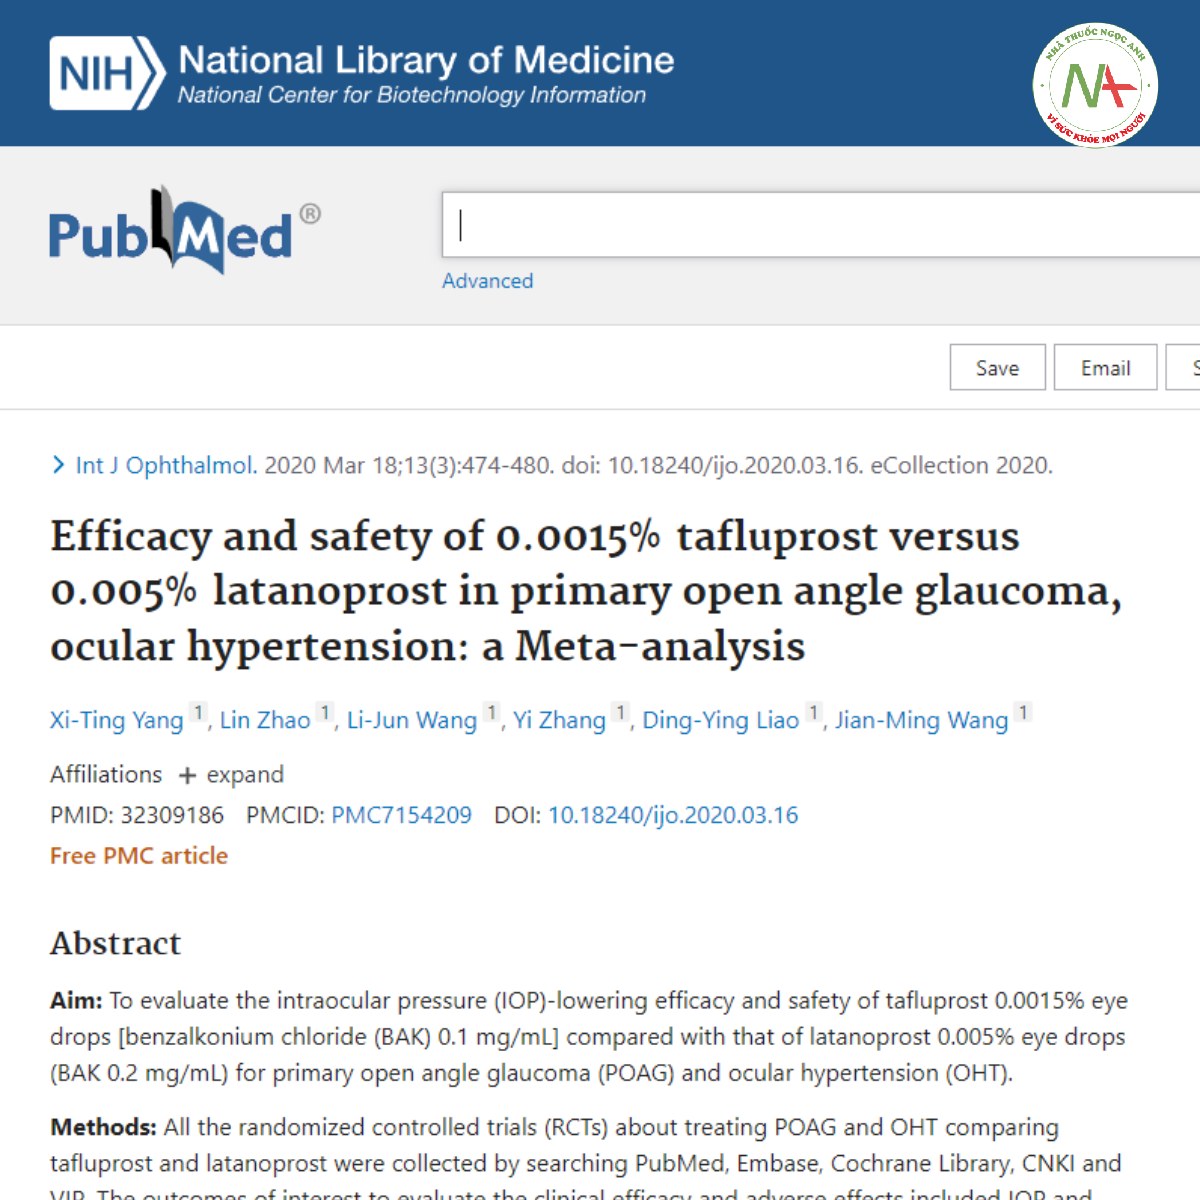 Efficacy and safety of 0.0015% tafluprost versus 0.005% latanoprost in primary open angle glaucoma, ocular hypertension_ a Meta-analysis